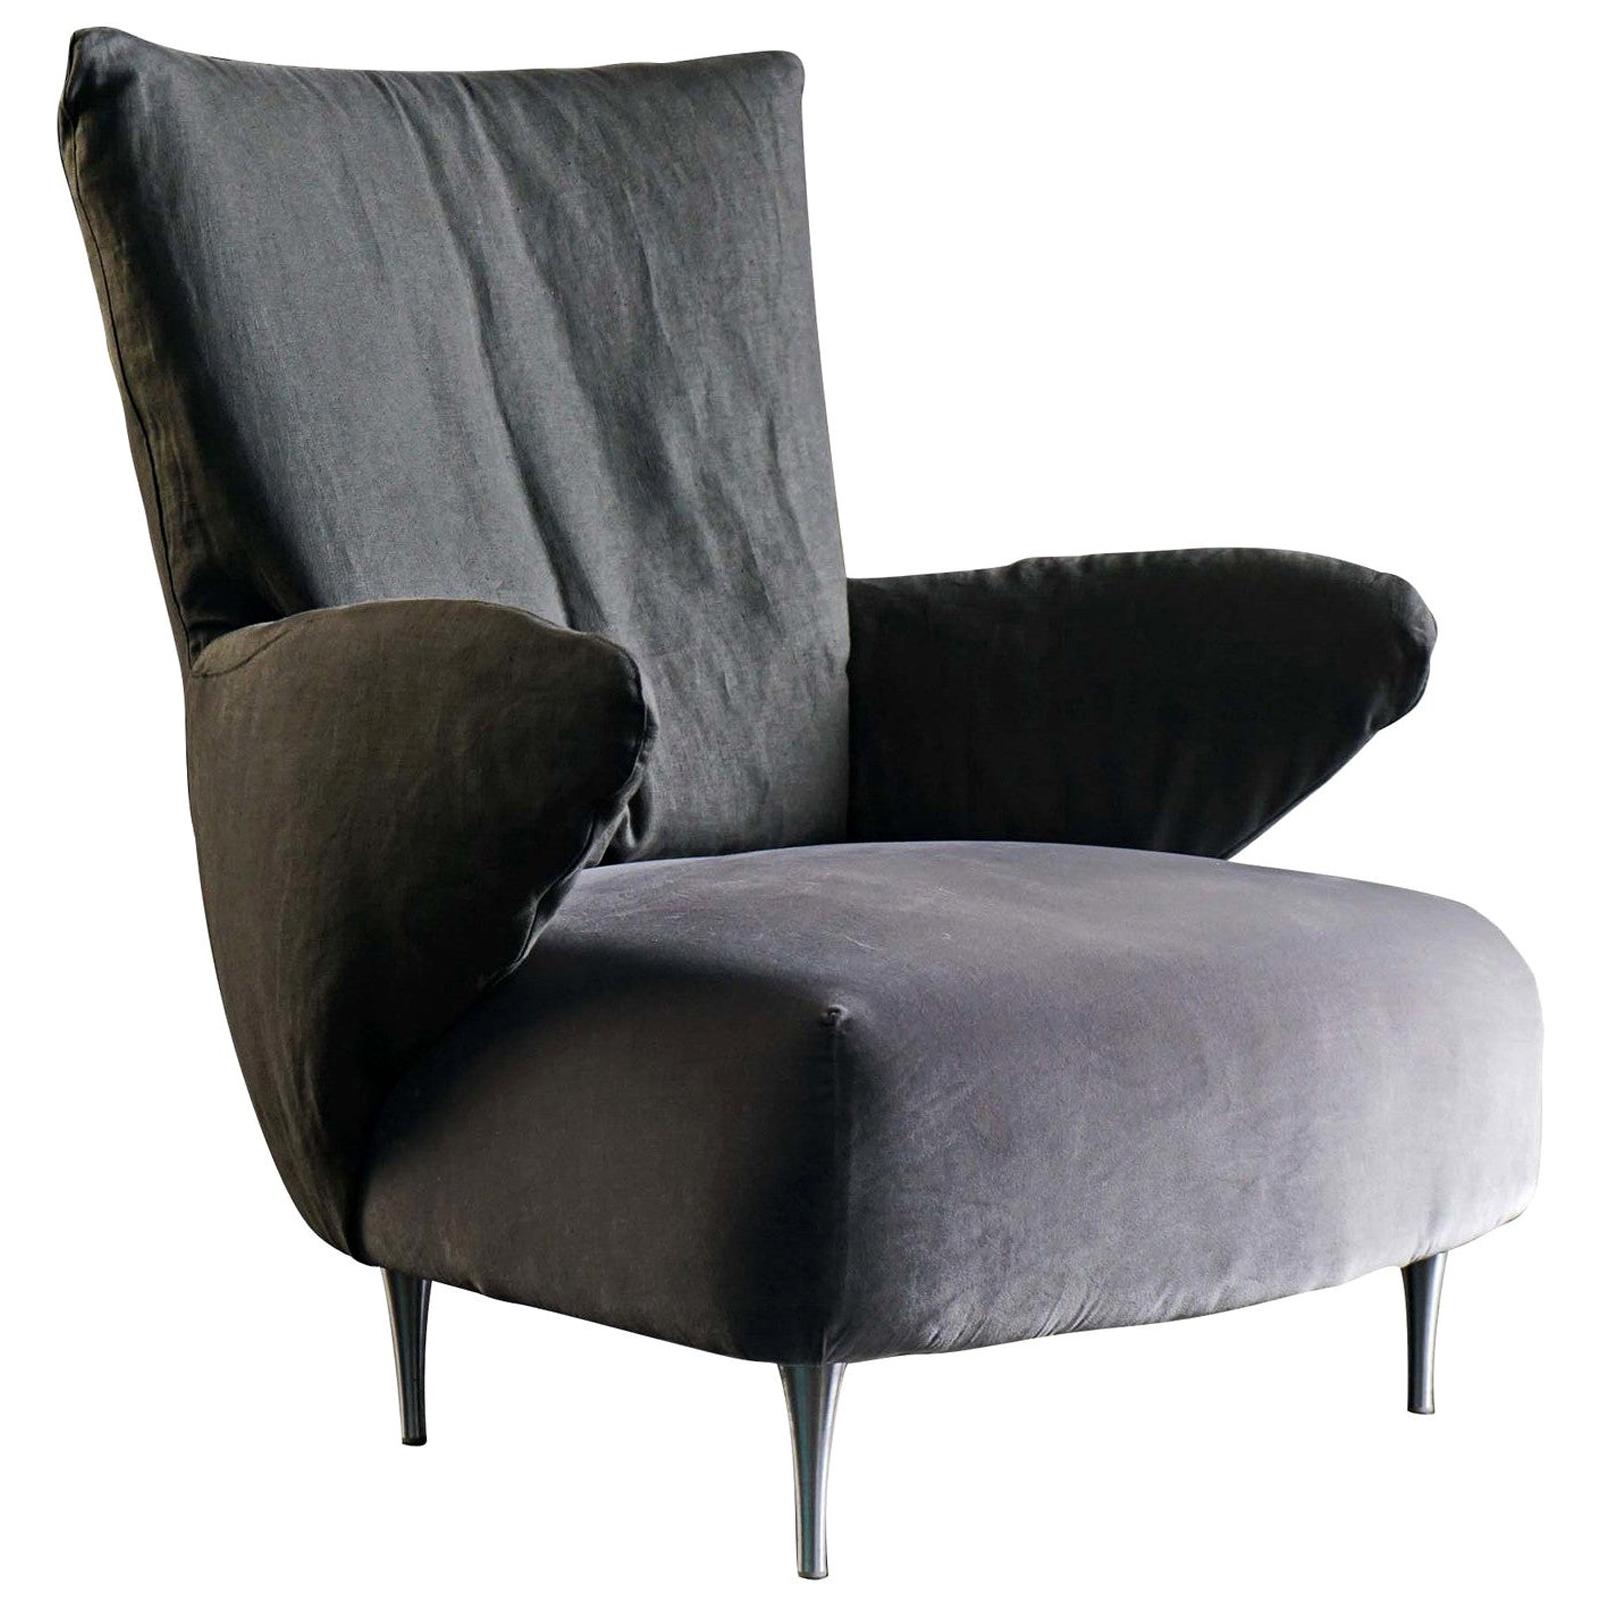 Pank Armchair by Andrea Vecera #1 For Sale